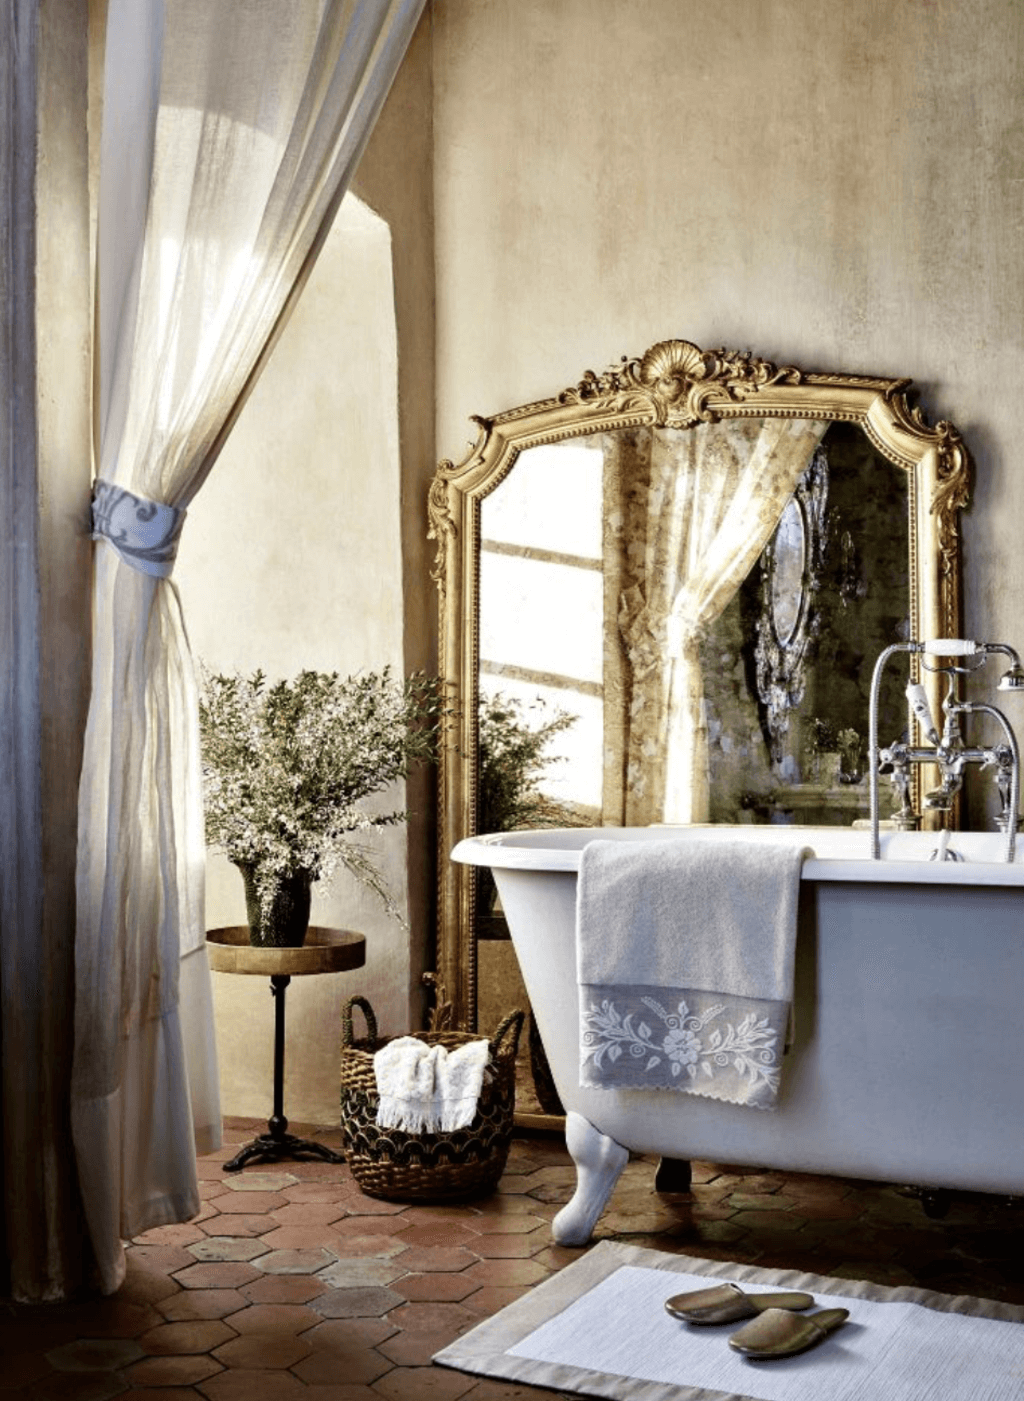 A bathroom with a large mirror and a claw foot tub
